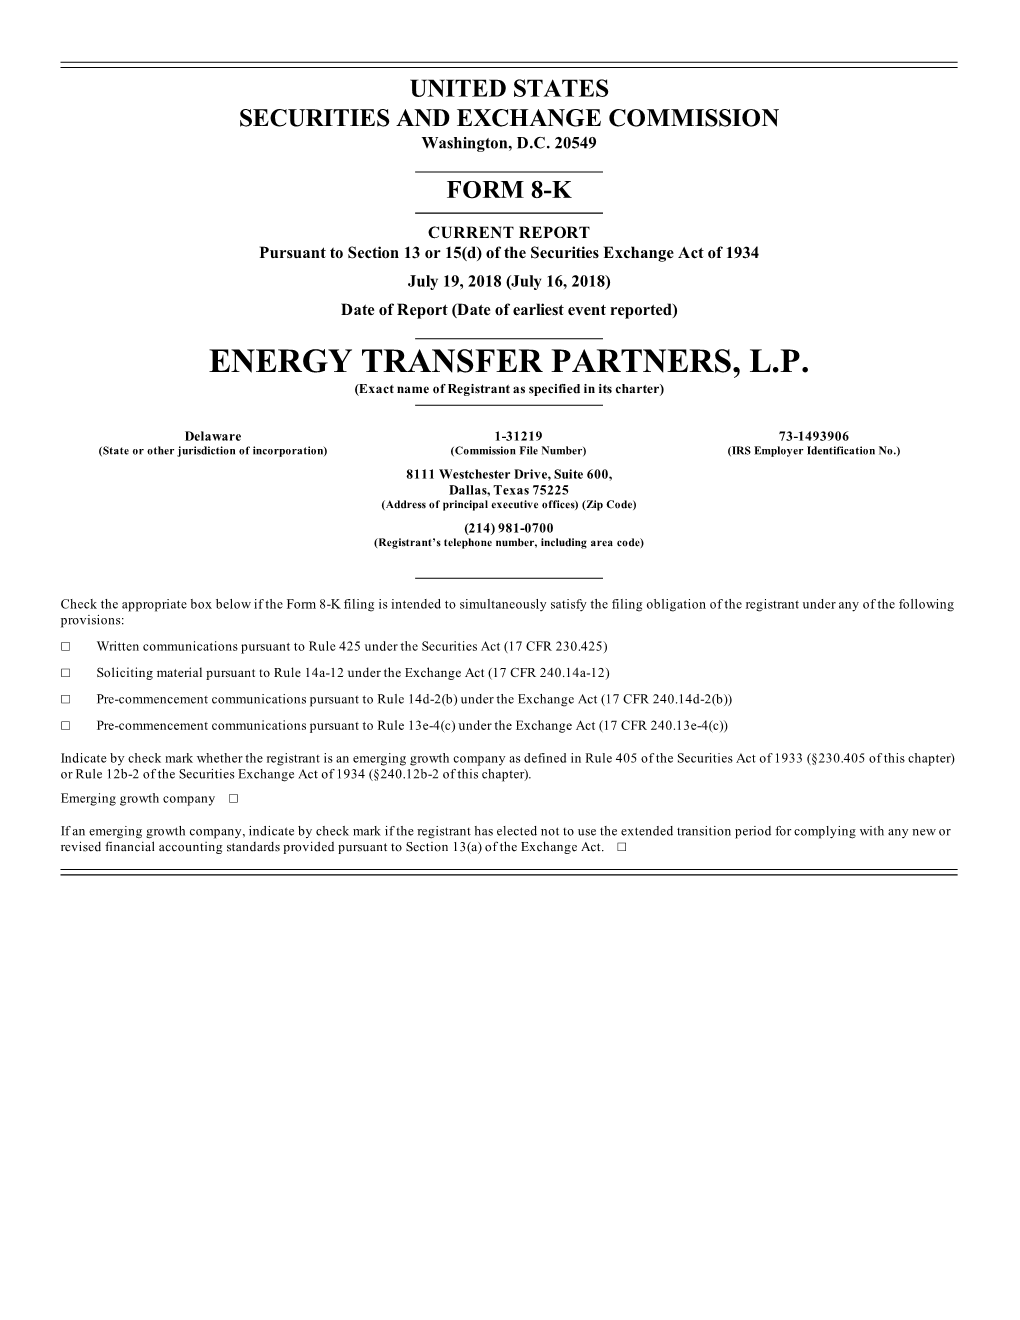 ENERGY TRANSFER PARTNERS, L.P. (Exact Name of Registrant As Specified in Its Charter)